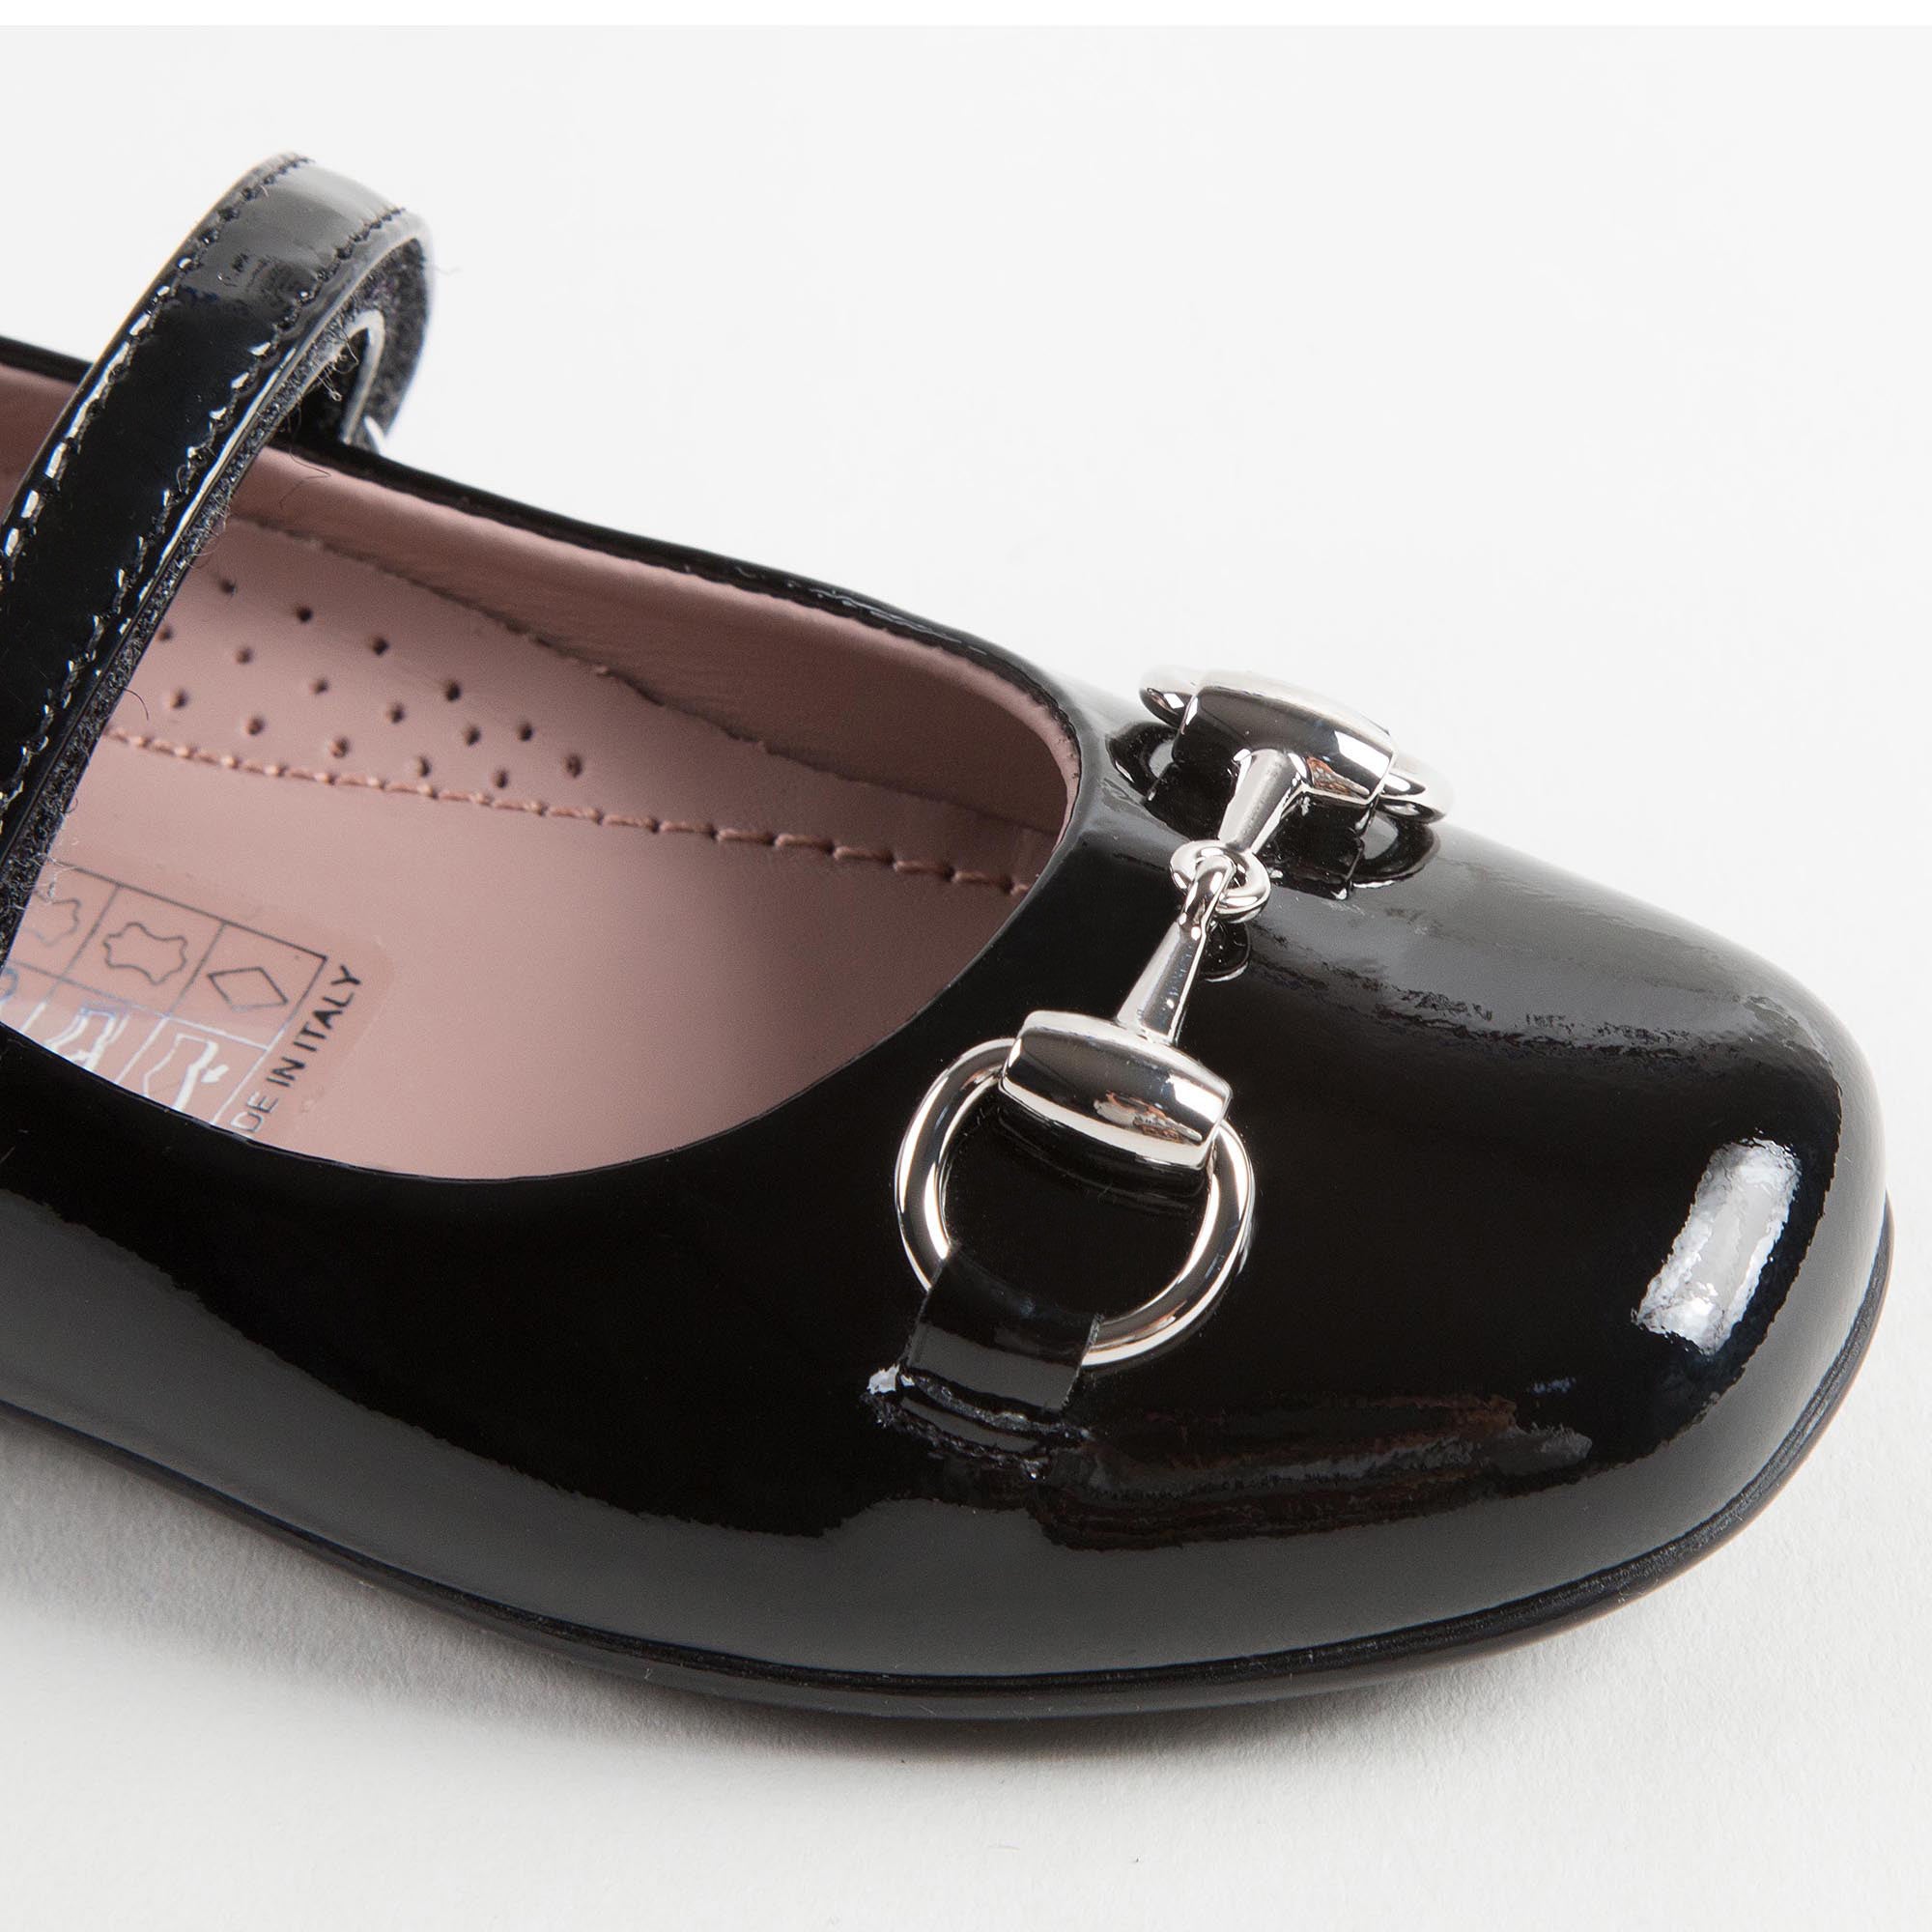 Baby Girls Black Patent Leather Shoes With Horsebit - CÉMAROSE | Children's Fashion Store - 5